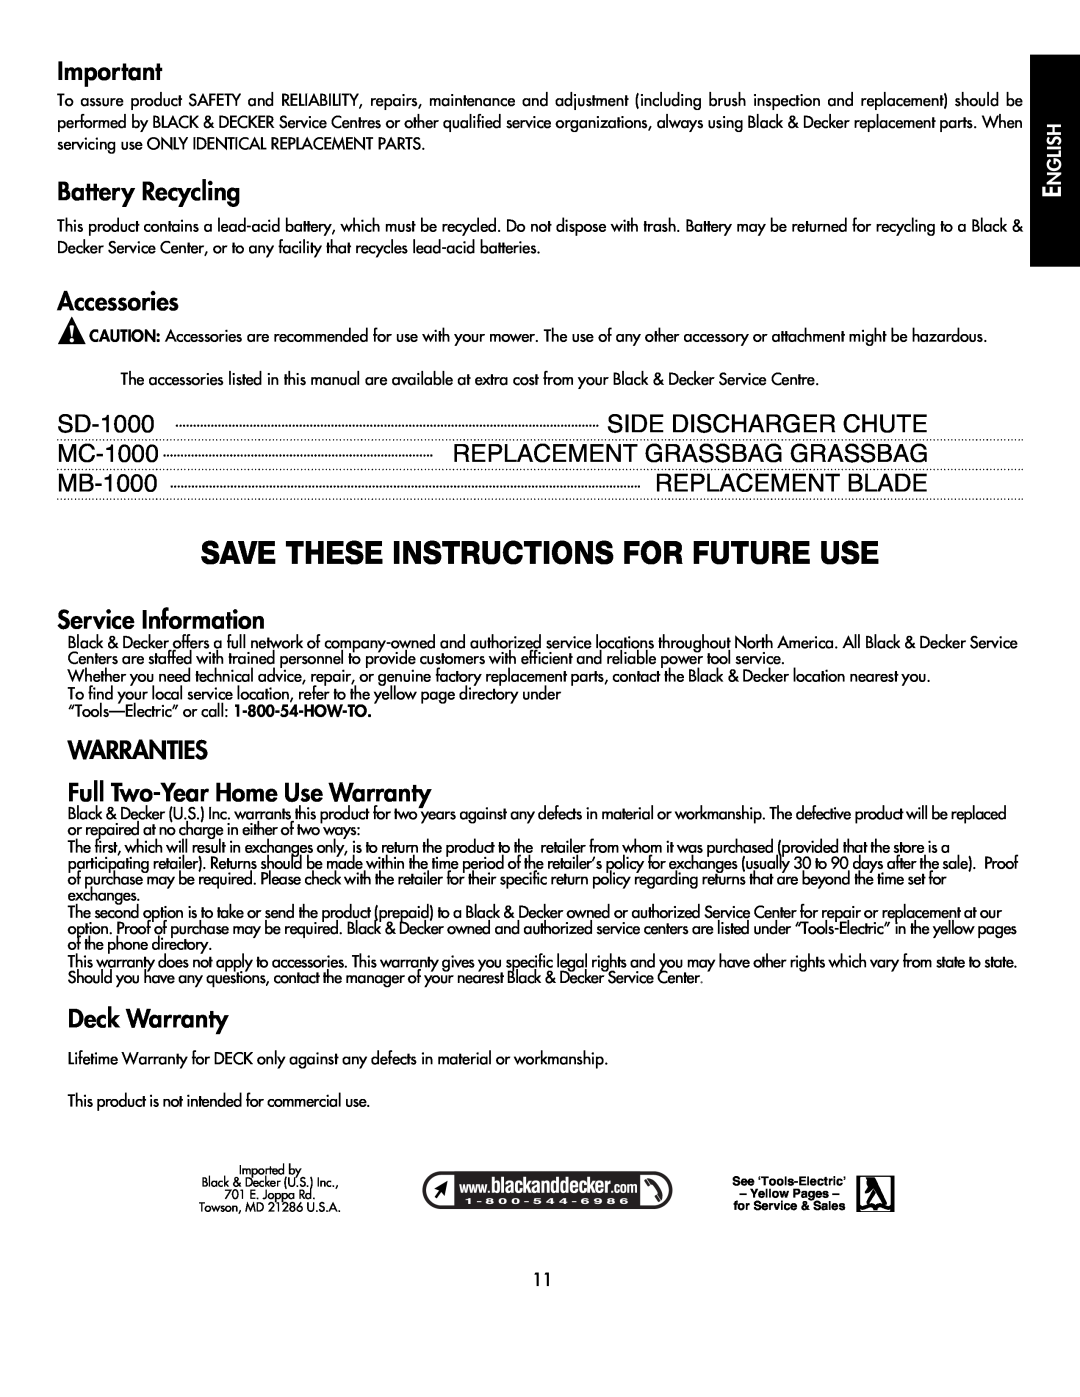 Black & Decker CMM1000 Save These Instructions For Future Use, Battery Recycling, Accessories, Service Information 